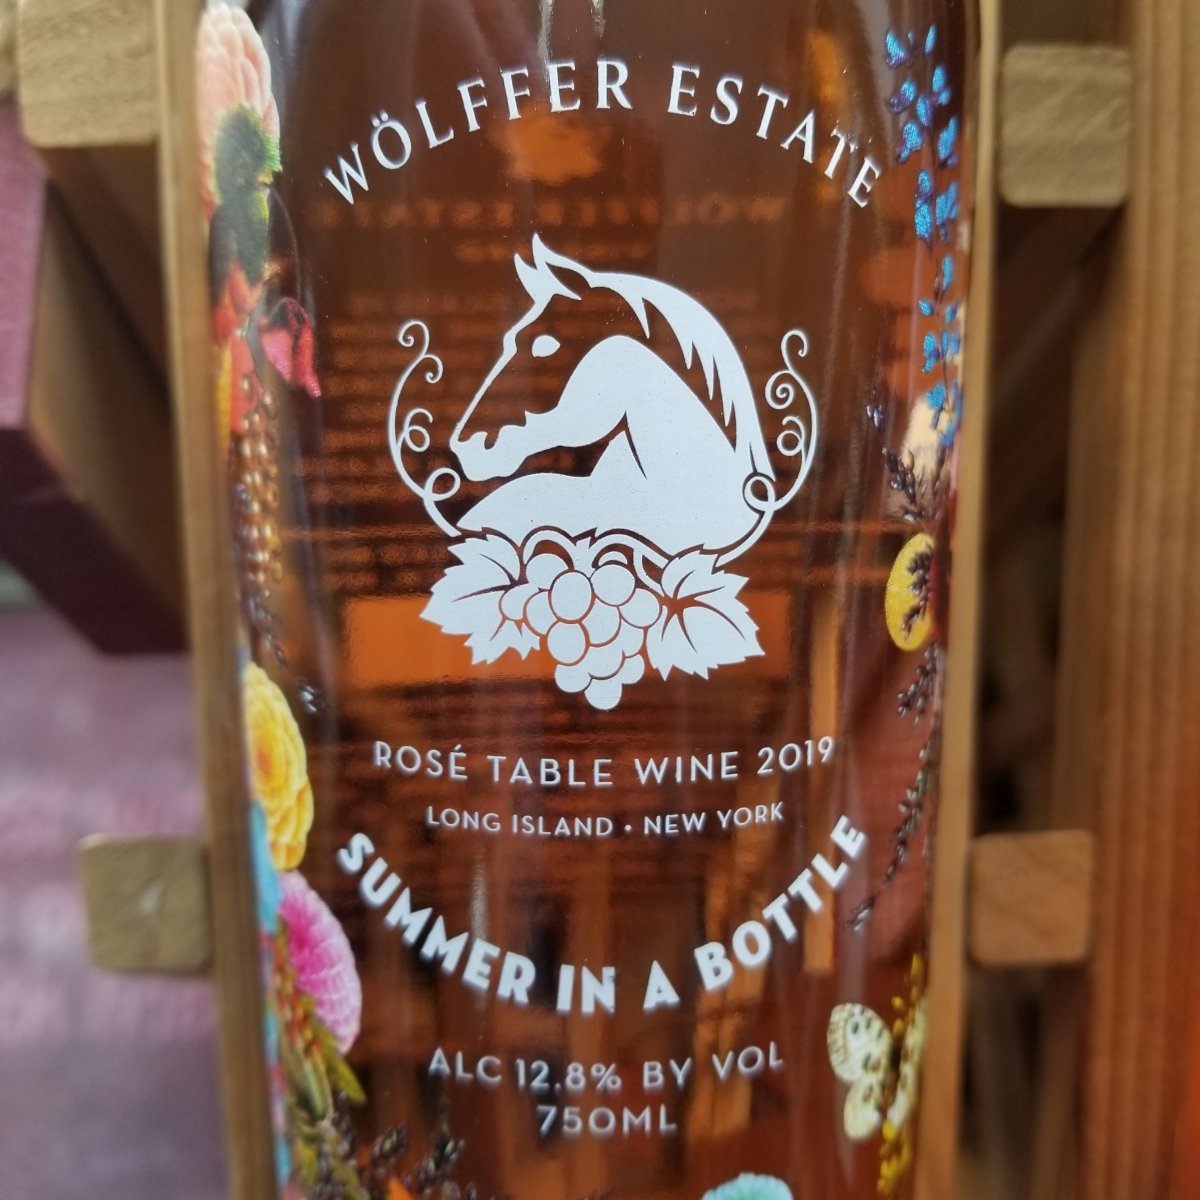 Wolffer Summer in a Bottle Rose 750ml - Sip & Say